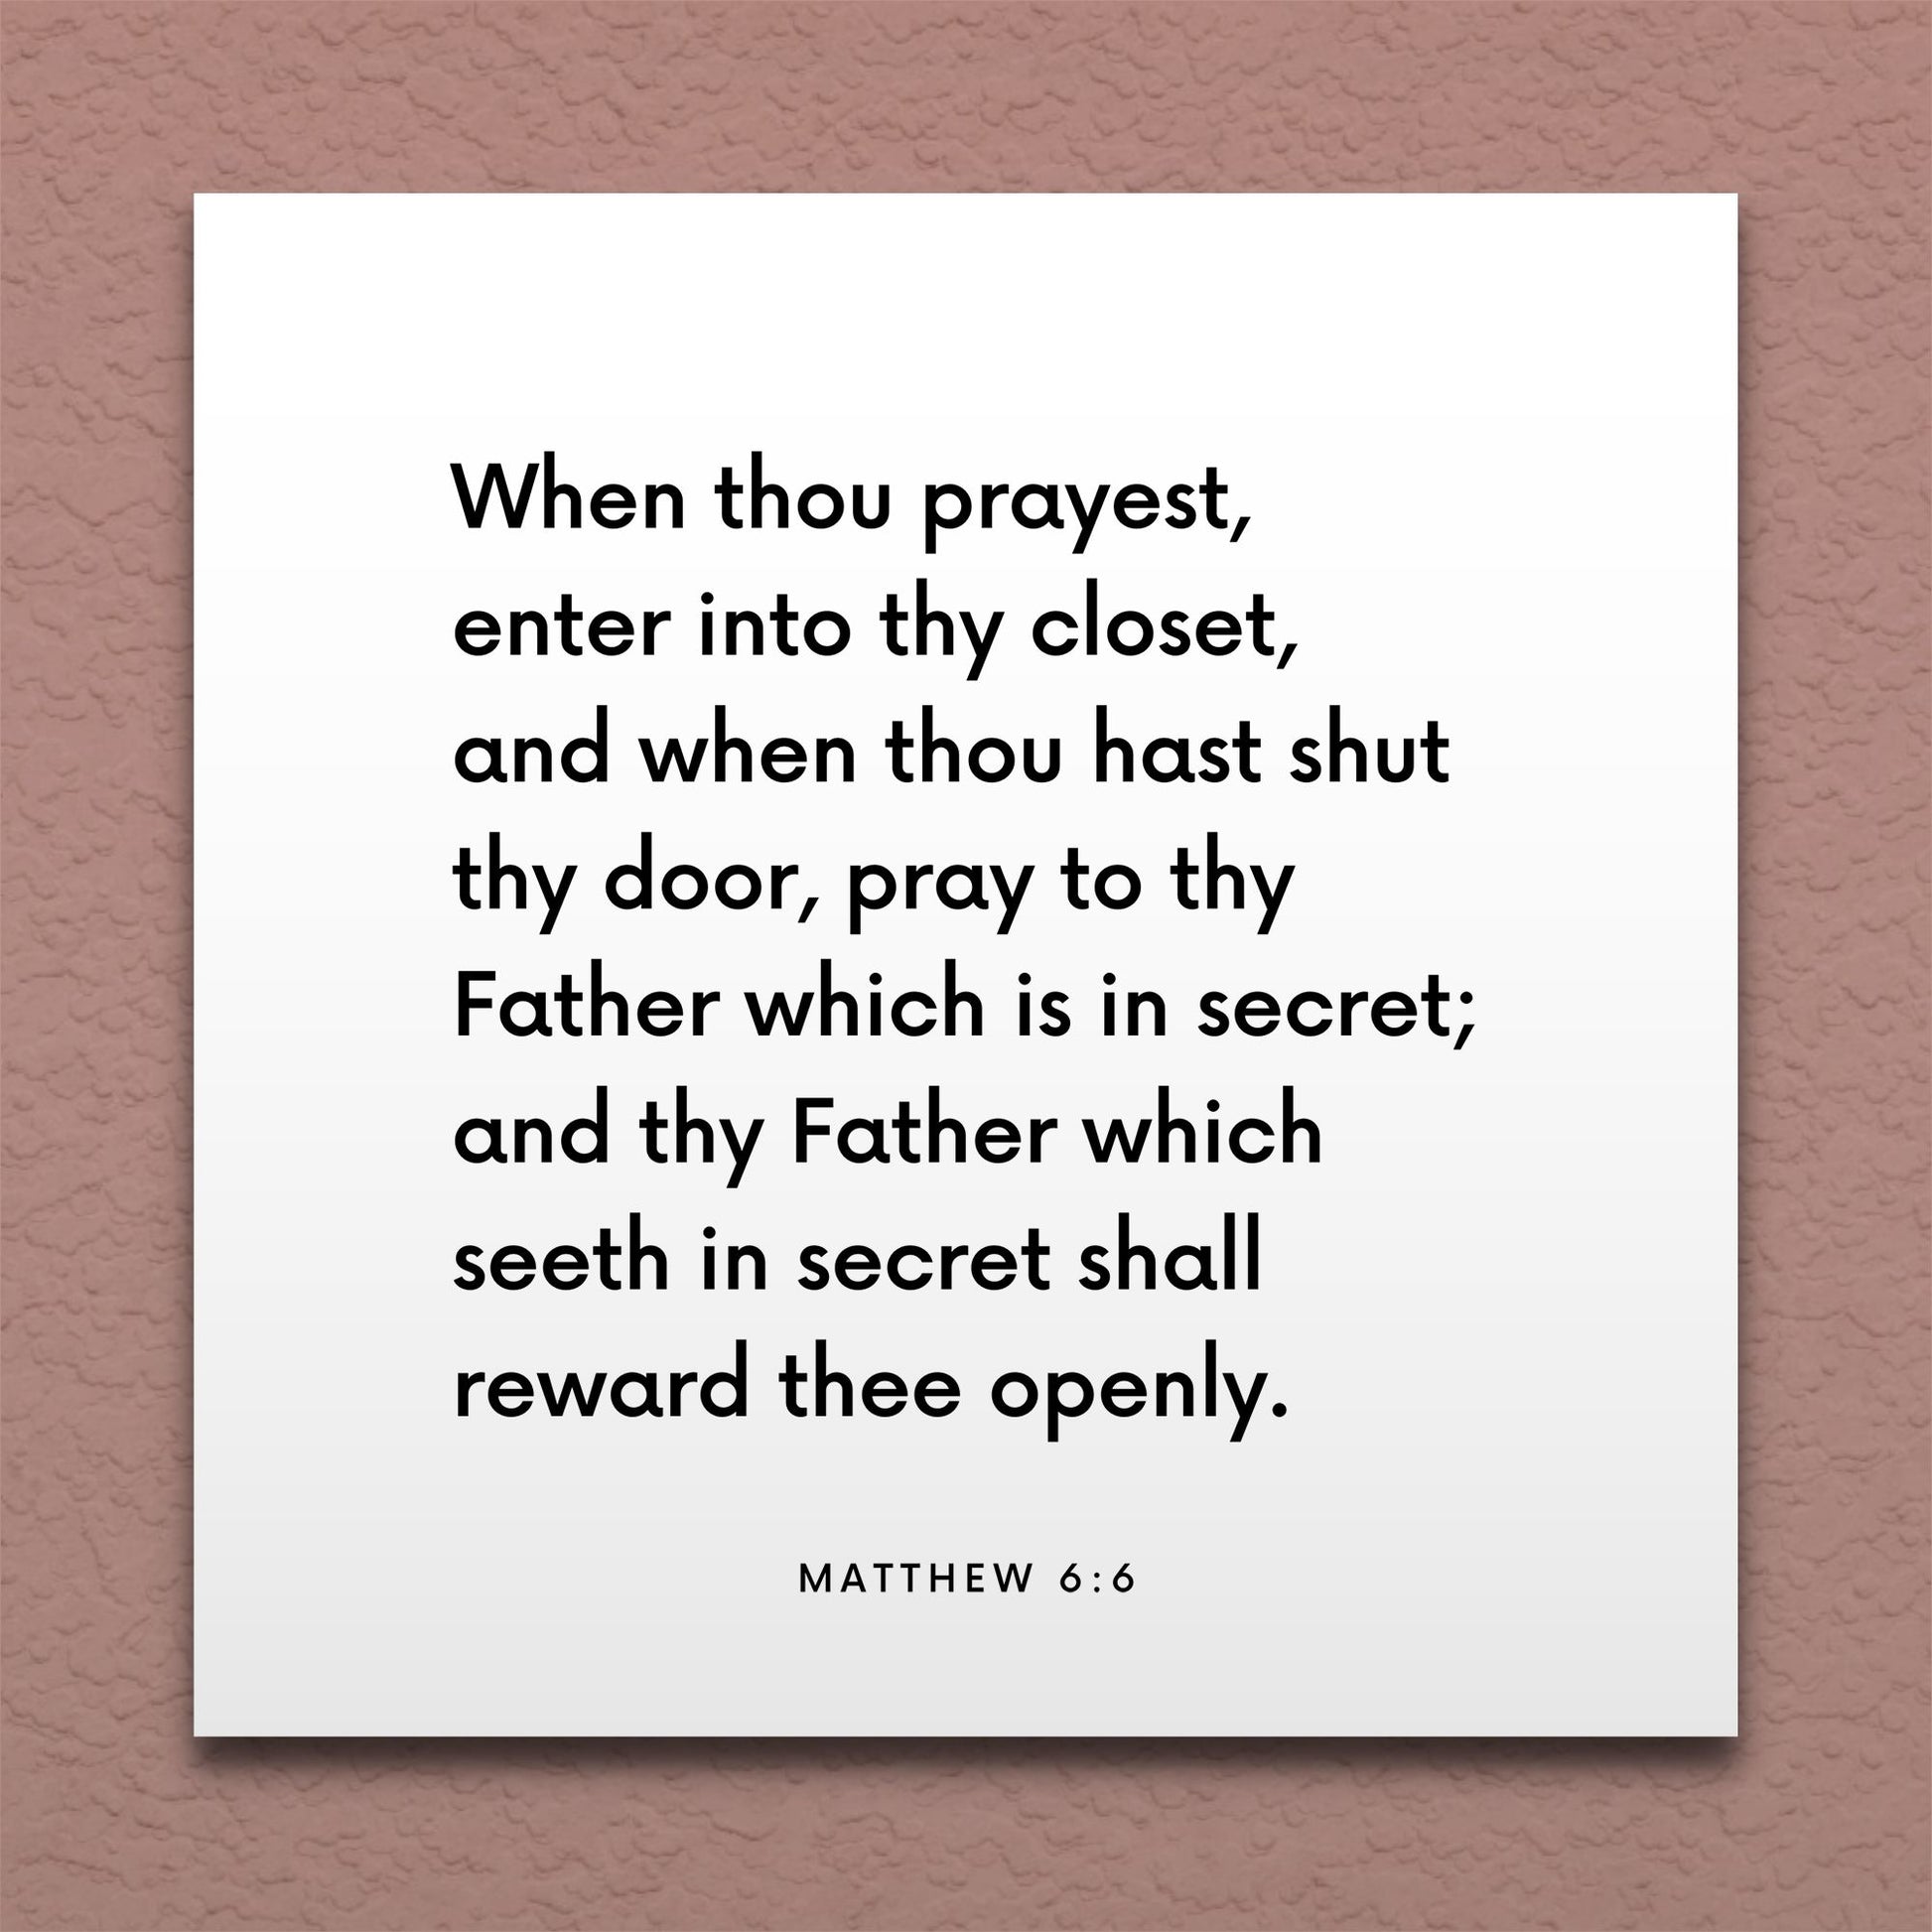 Wall-mounted scripture tile for Matthew 6:6 - "When thou prayest, enter into thy closet"